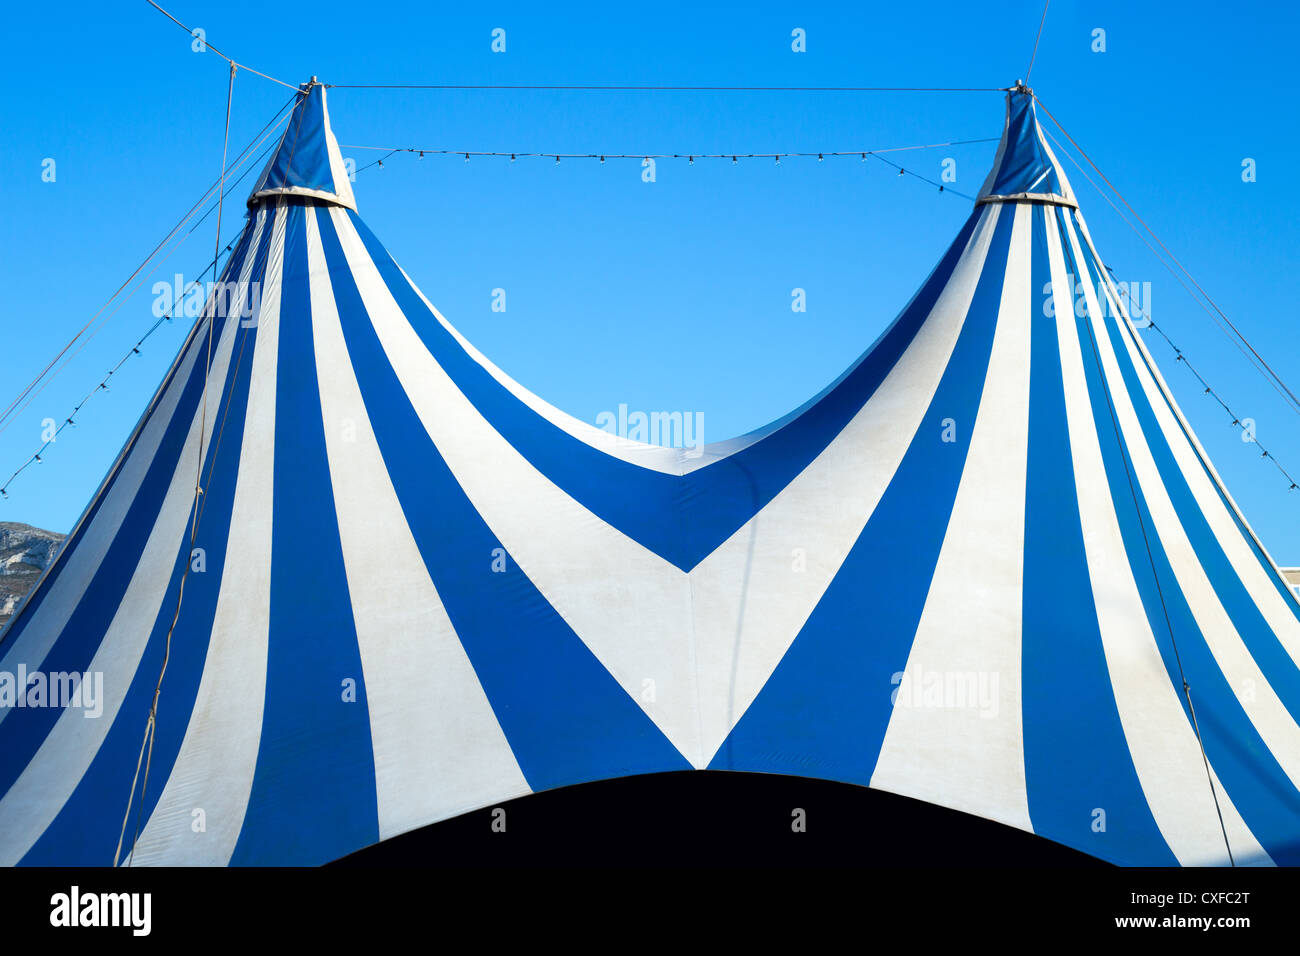 Circus tent stripped blue and white over clear sky Stock Photo